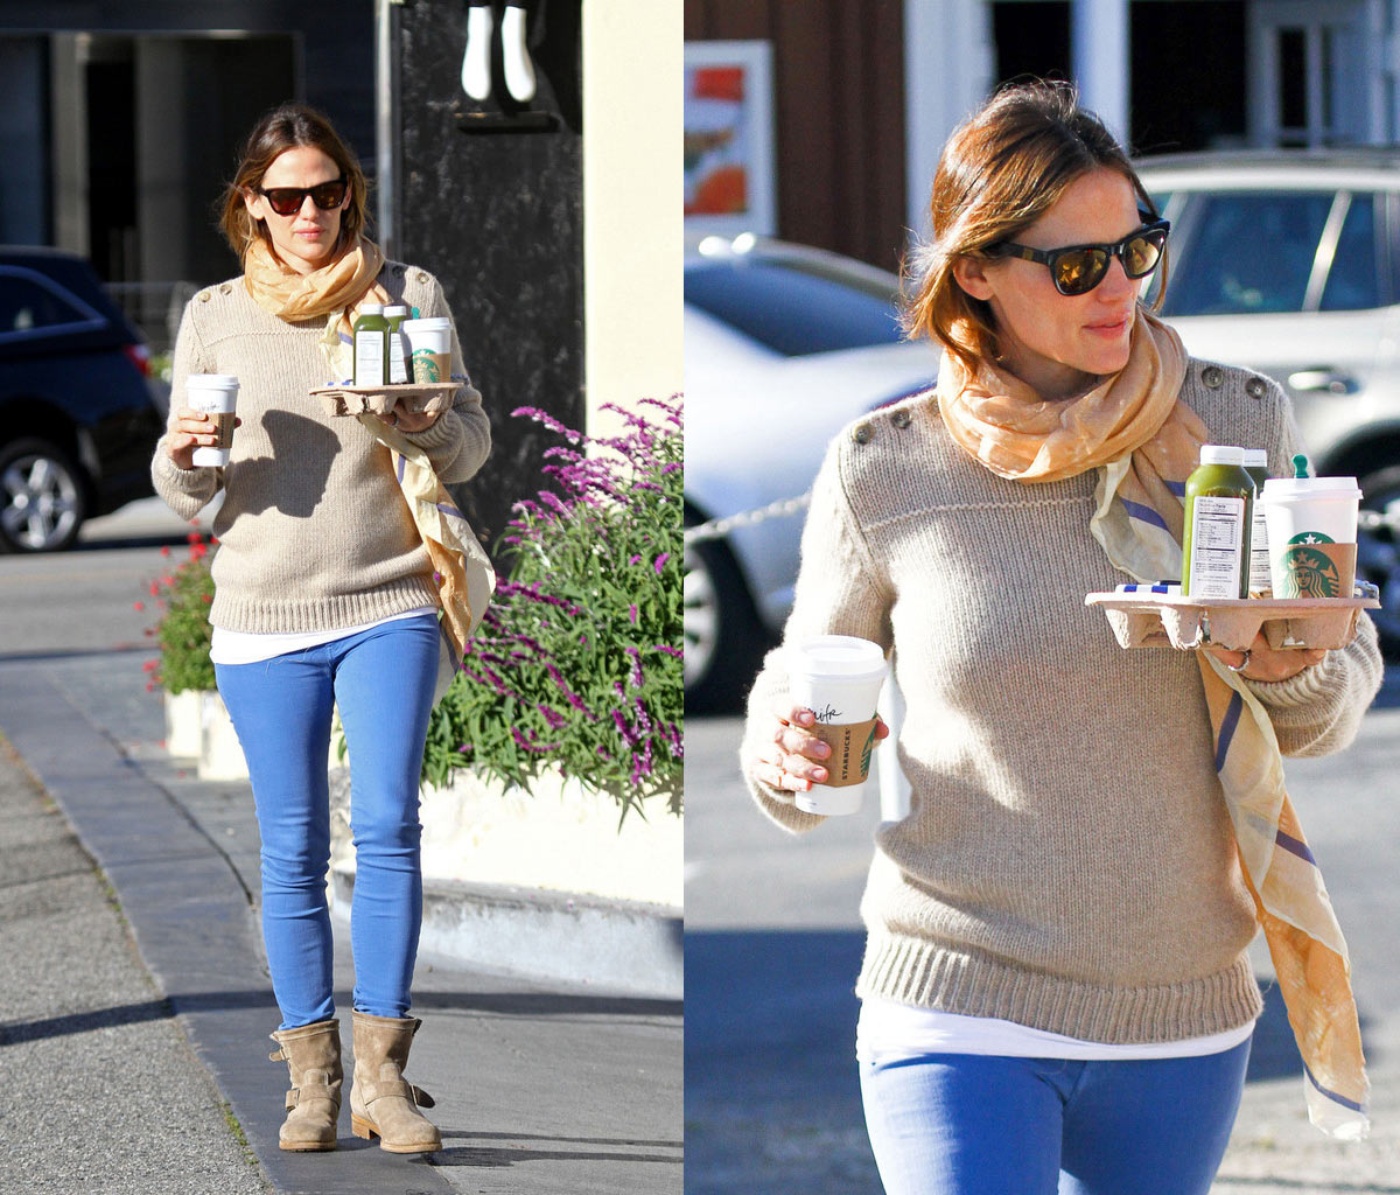 Jennifer Garner Getting Starbucks submitted by Canary + Rook